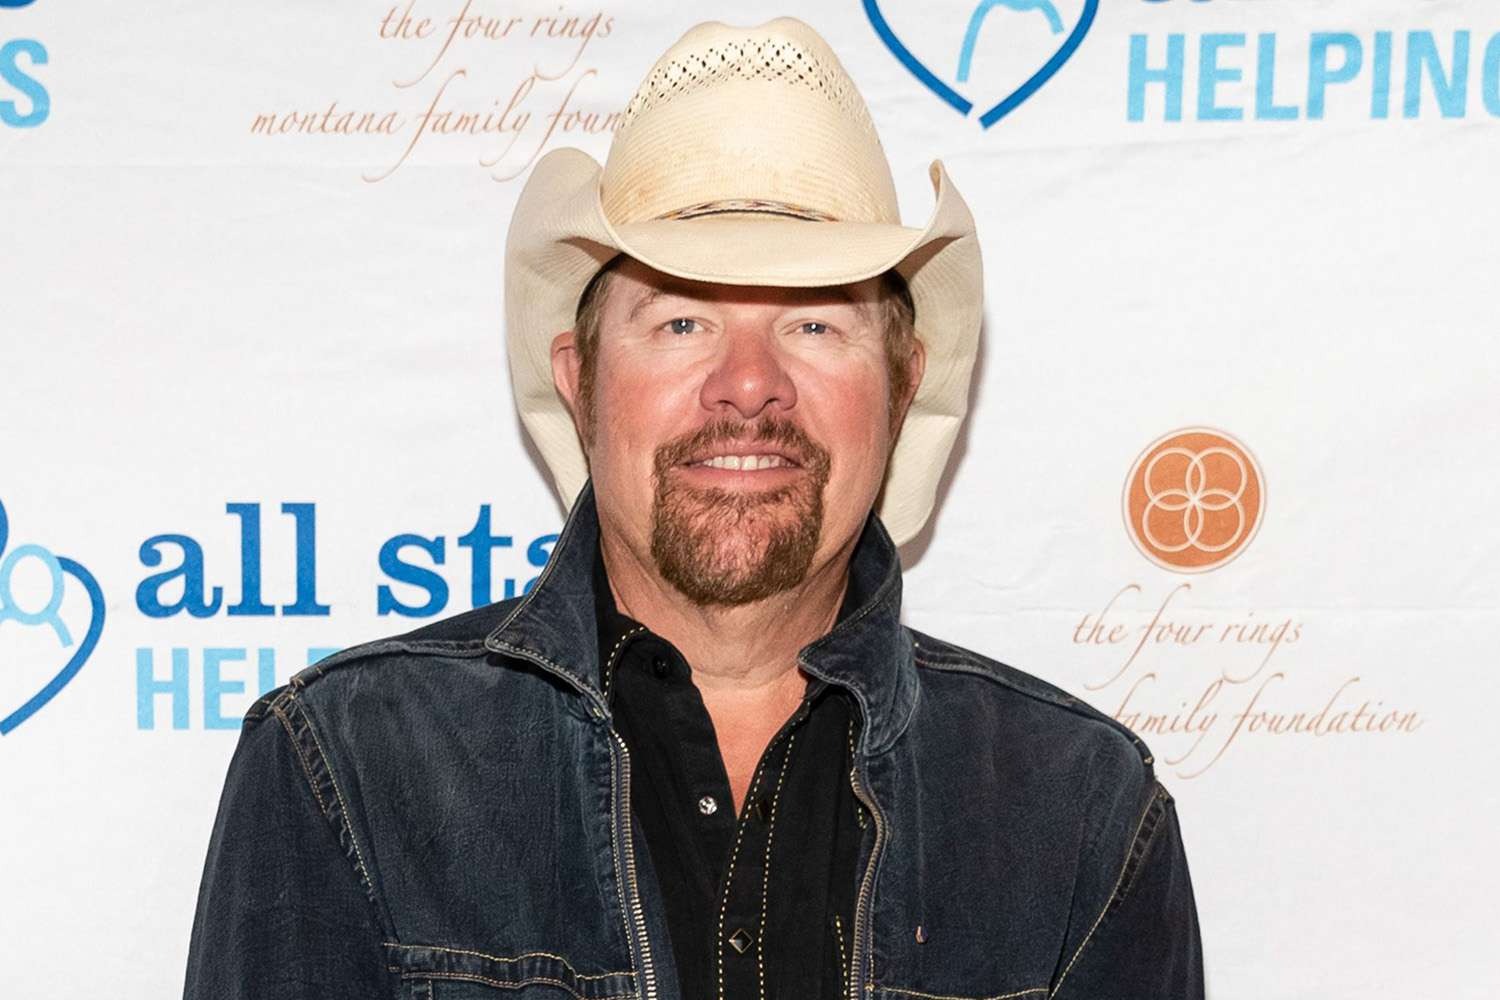 Country music icon, Toby Keith